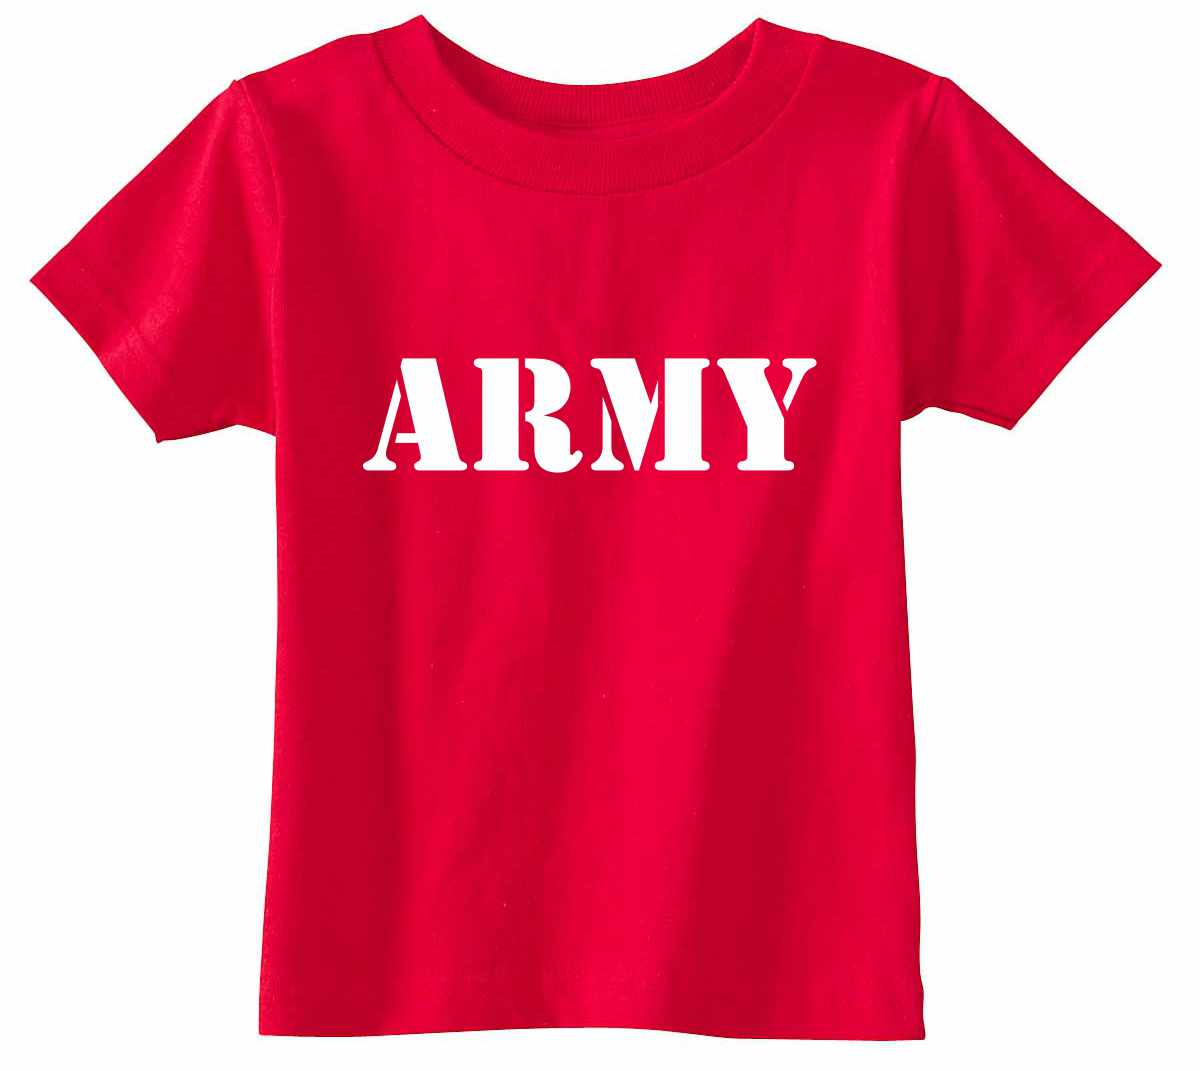 ARMY Infant/Toddler  (#338-7)